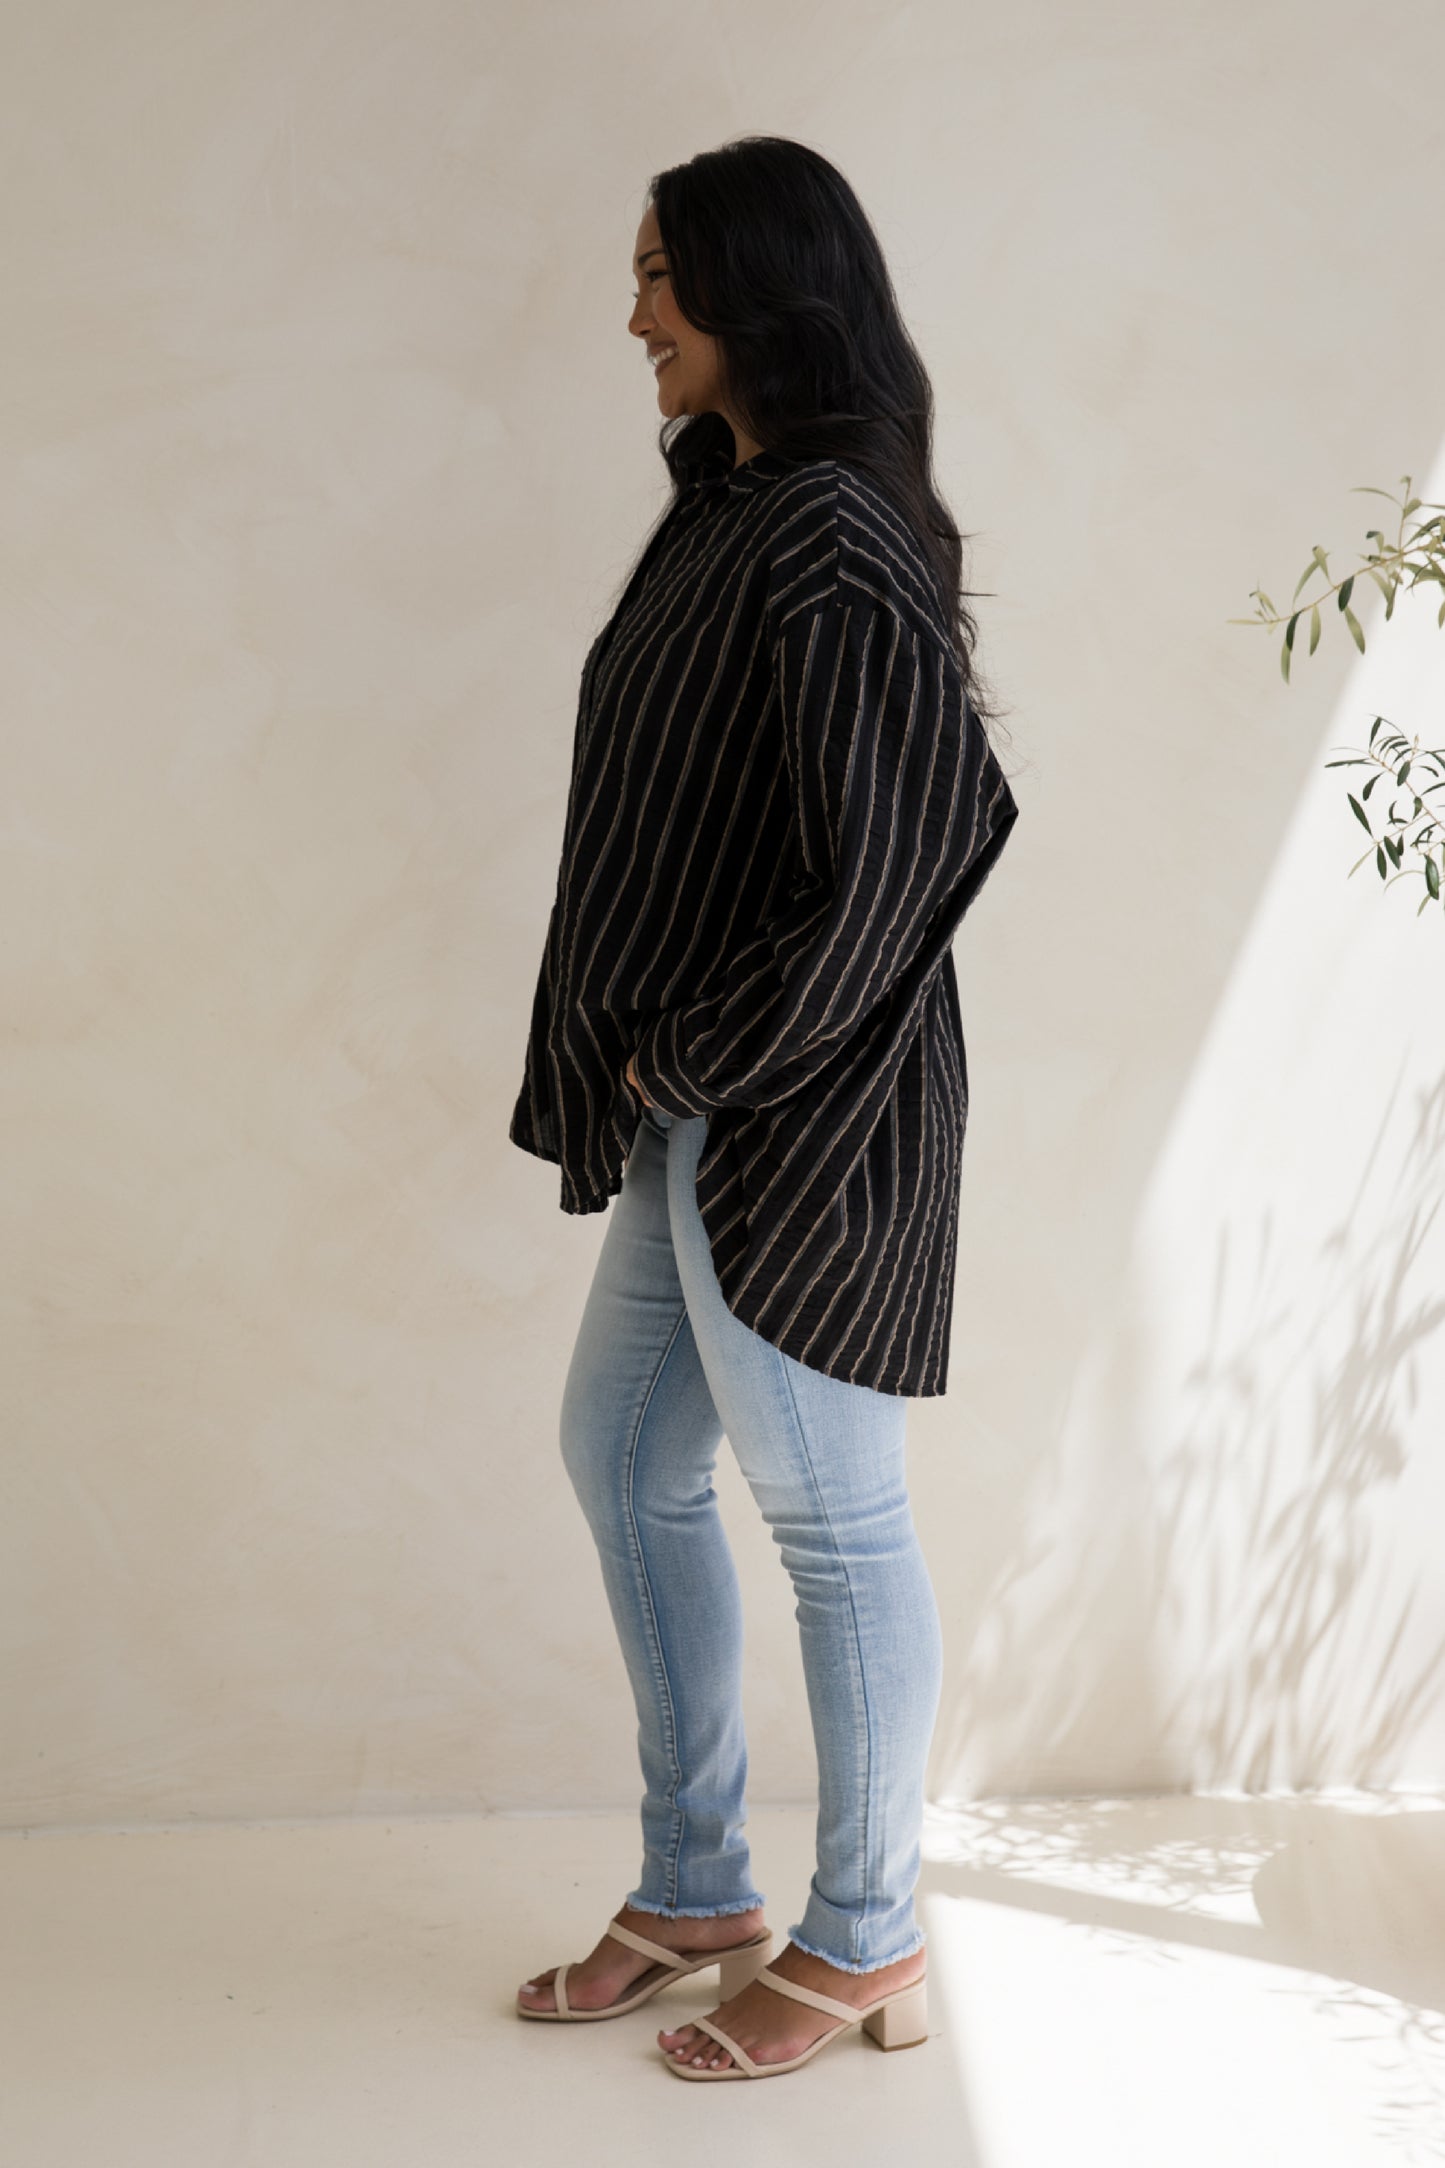 Amore Shirt in Black and Beige Stripe